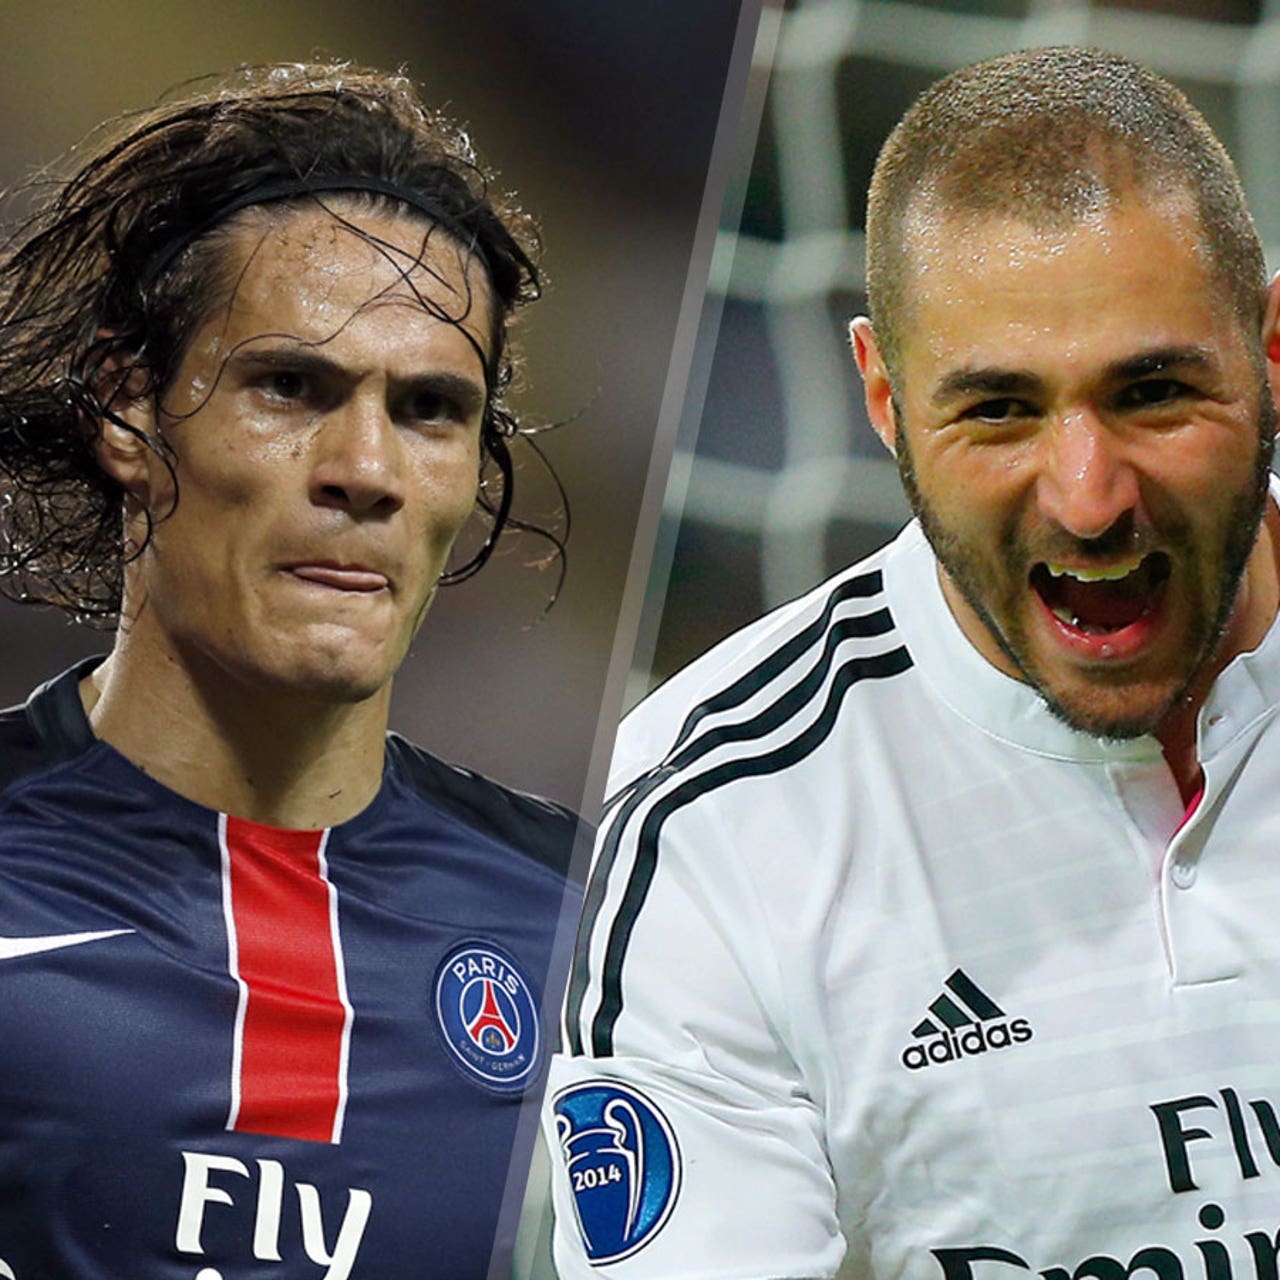 Arsenal continue to be linked with star duo Cavani, Benzema - FOX Sports